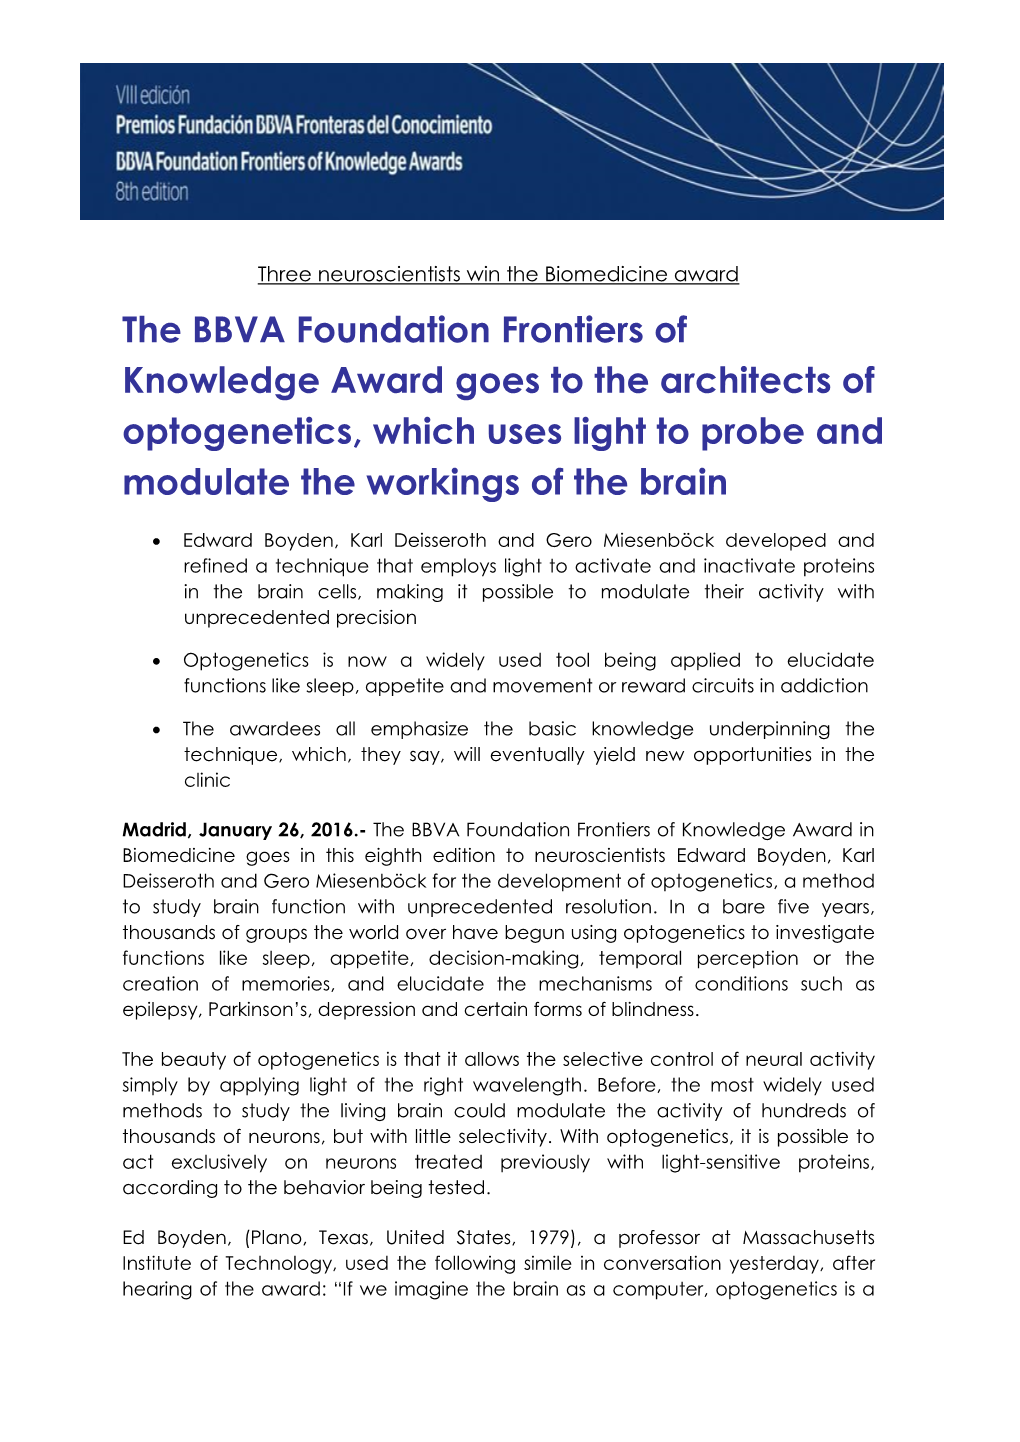 The BBVA Foundation Frontiers of Knowledge Award Goes to the Architects of Optogenetics, Which Uses Light to Probe and Modulate the Workings of the Brain